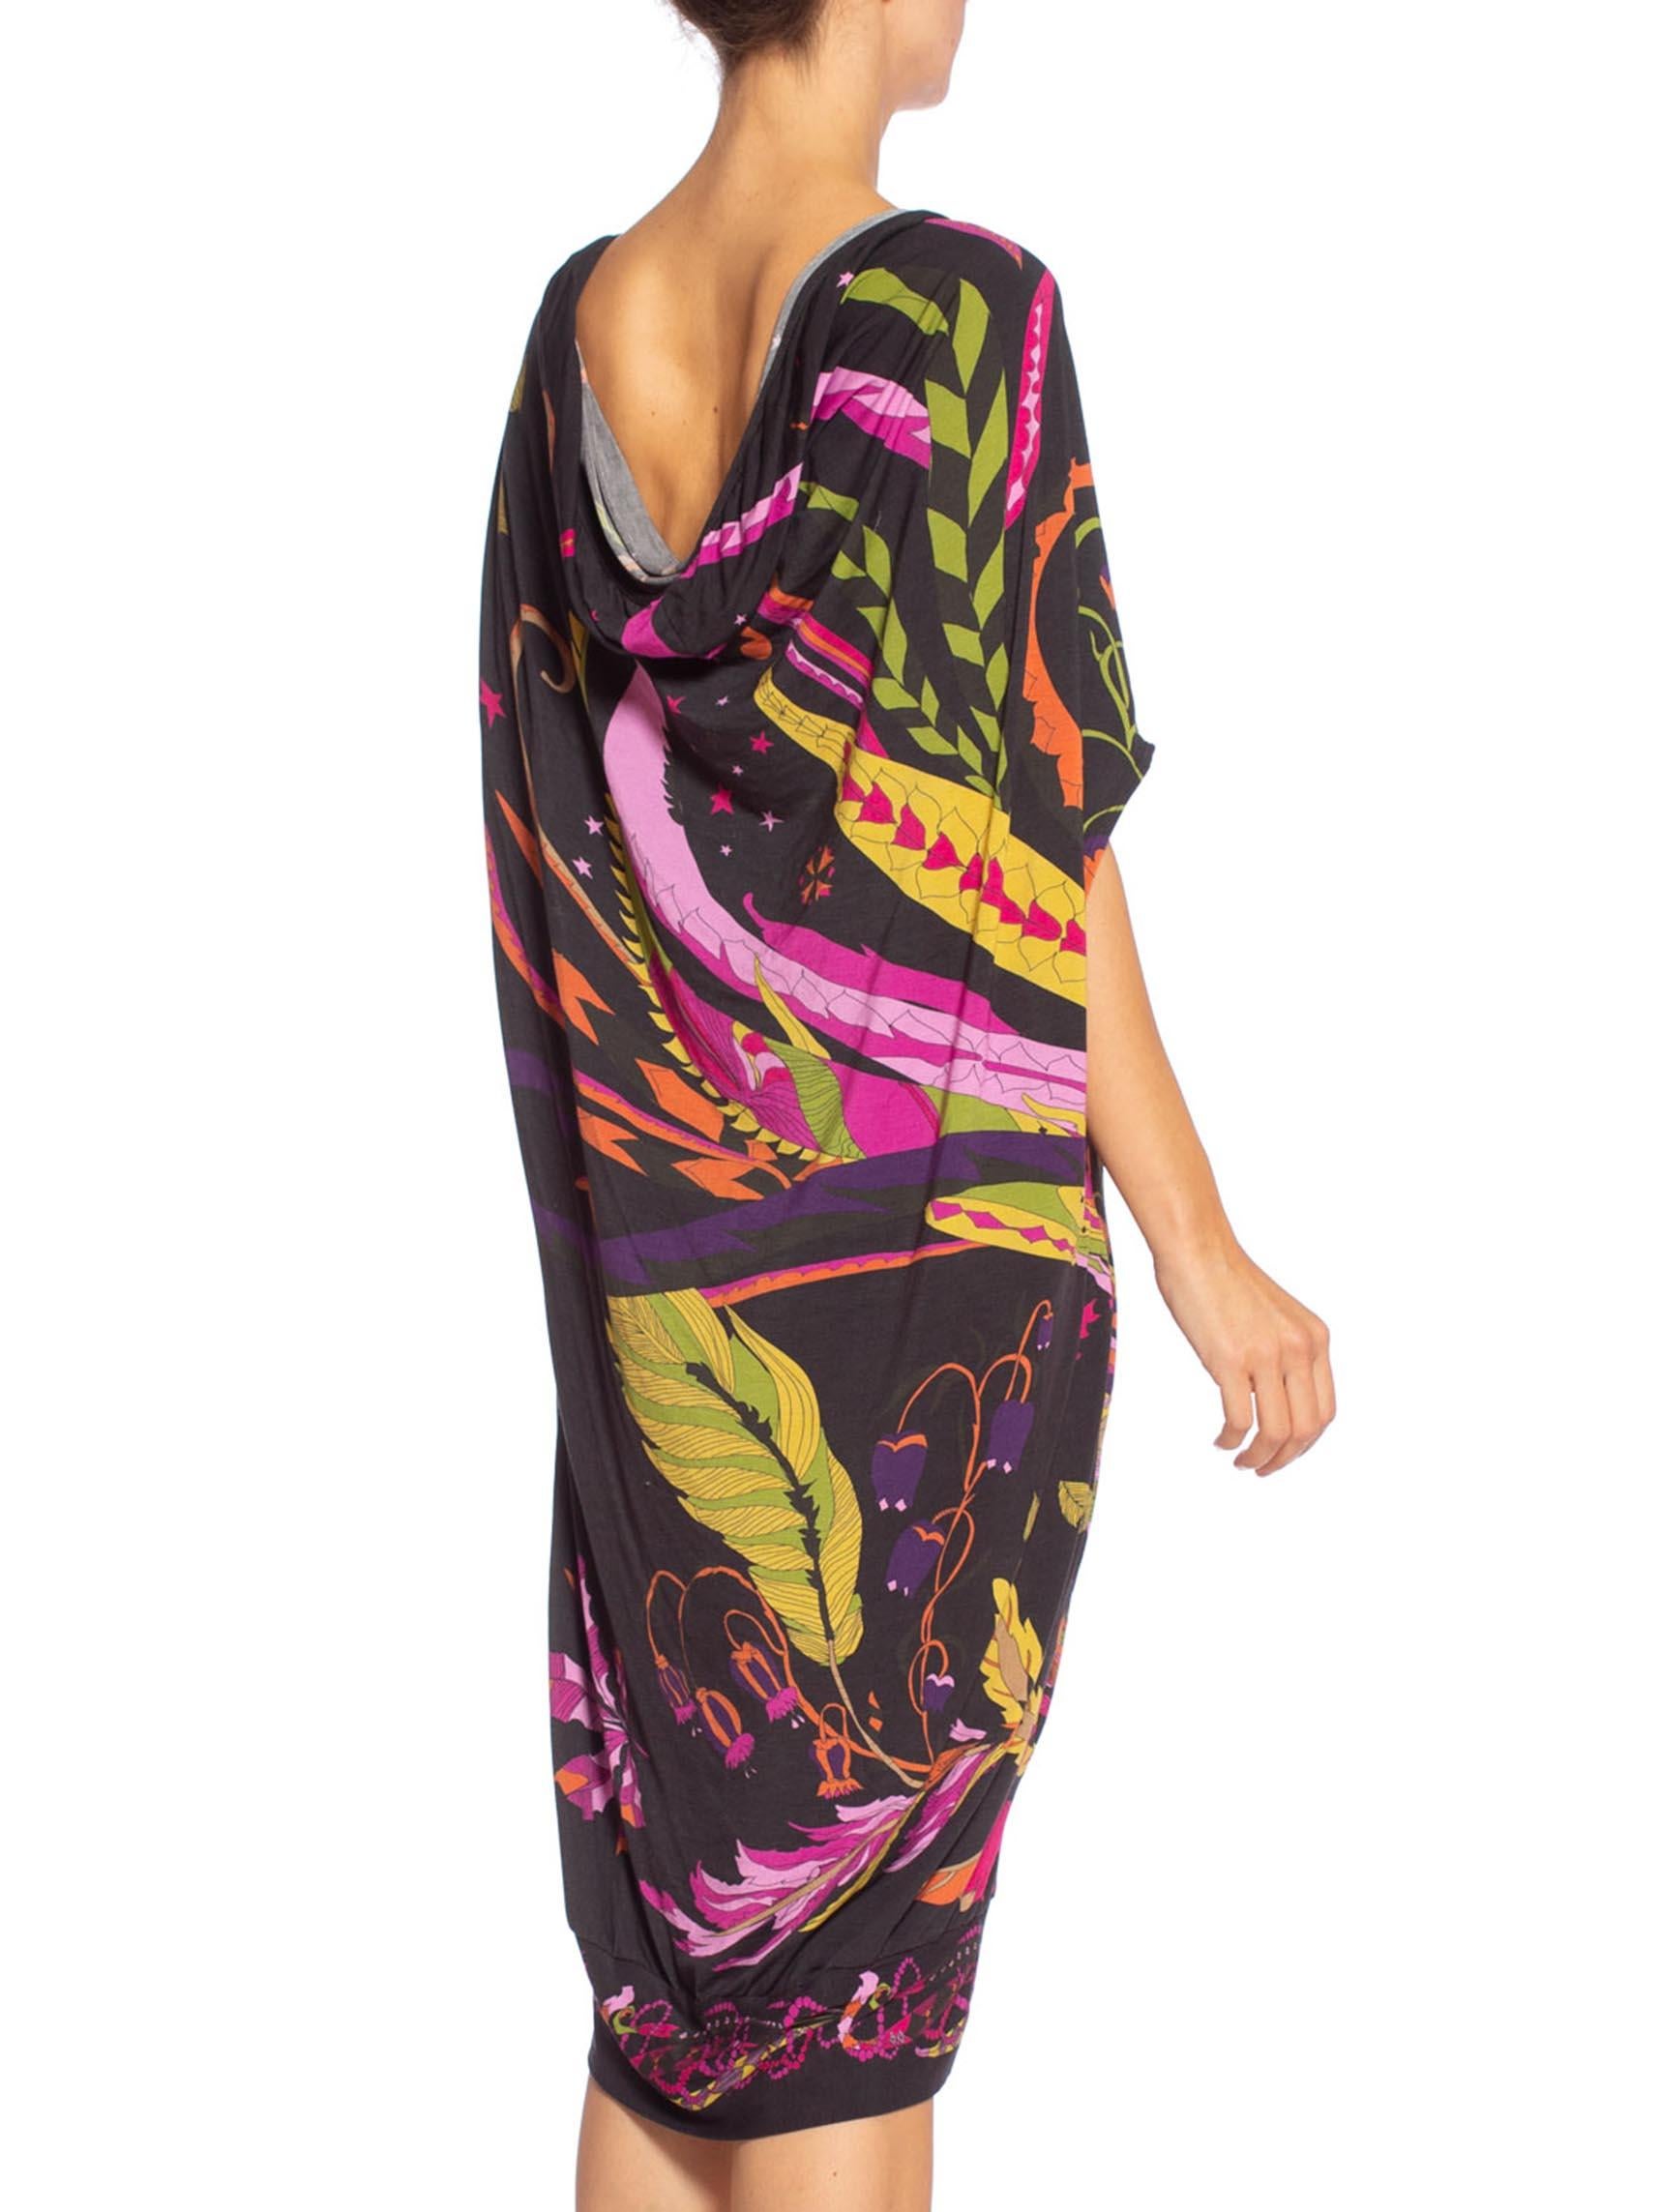 MORPHEW COLLECTION 1970'S Psychedelic Fortune Teller Print Dress 4